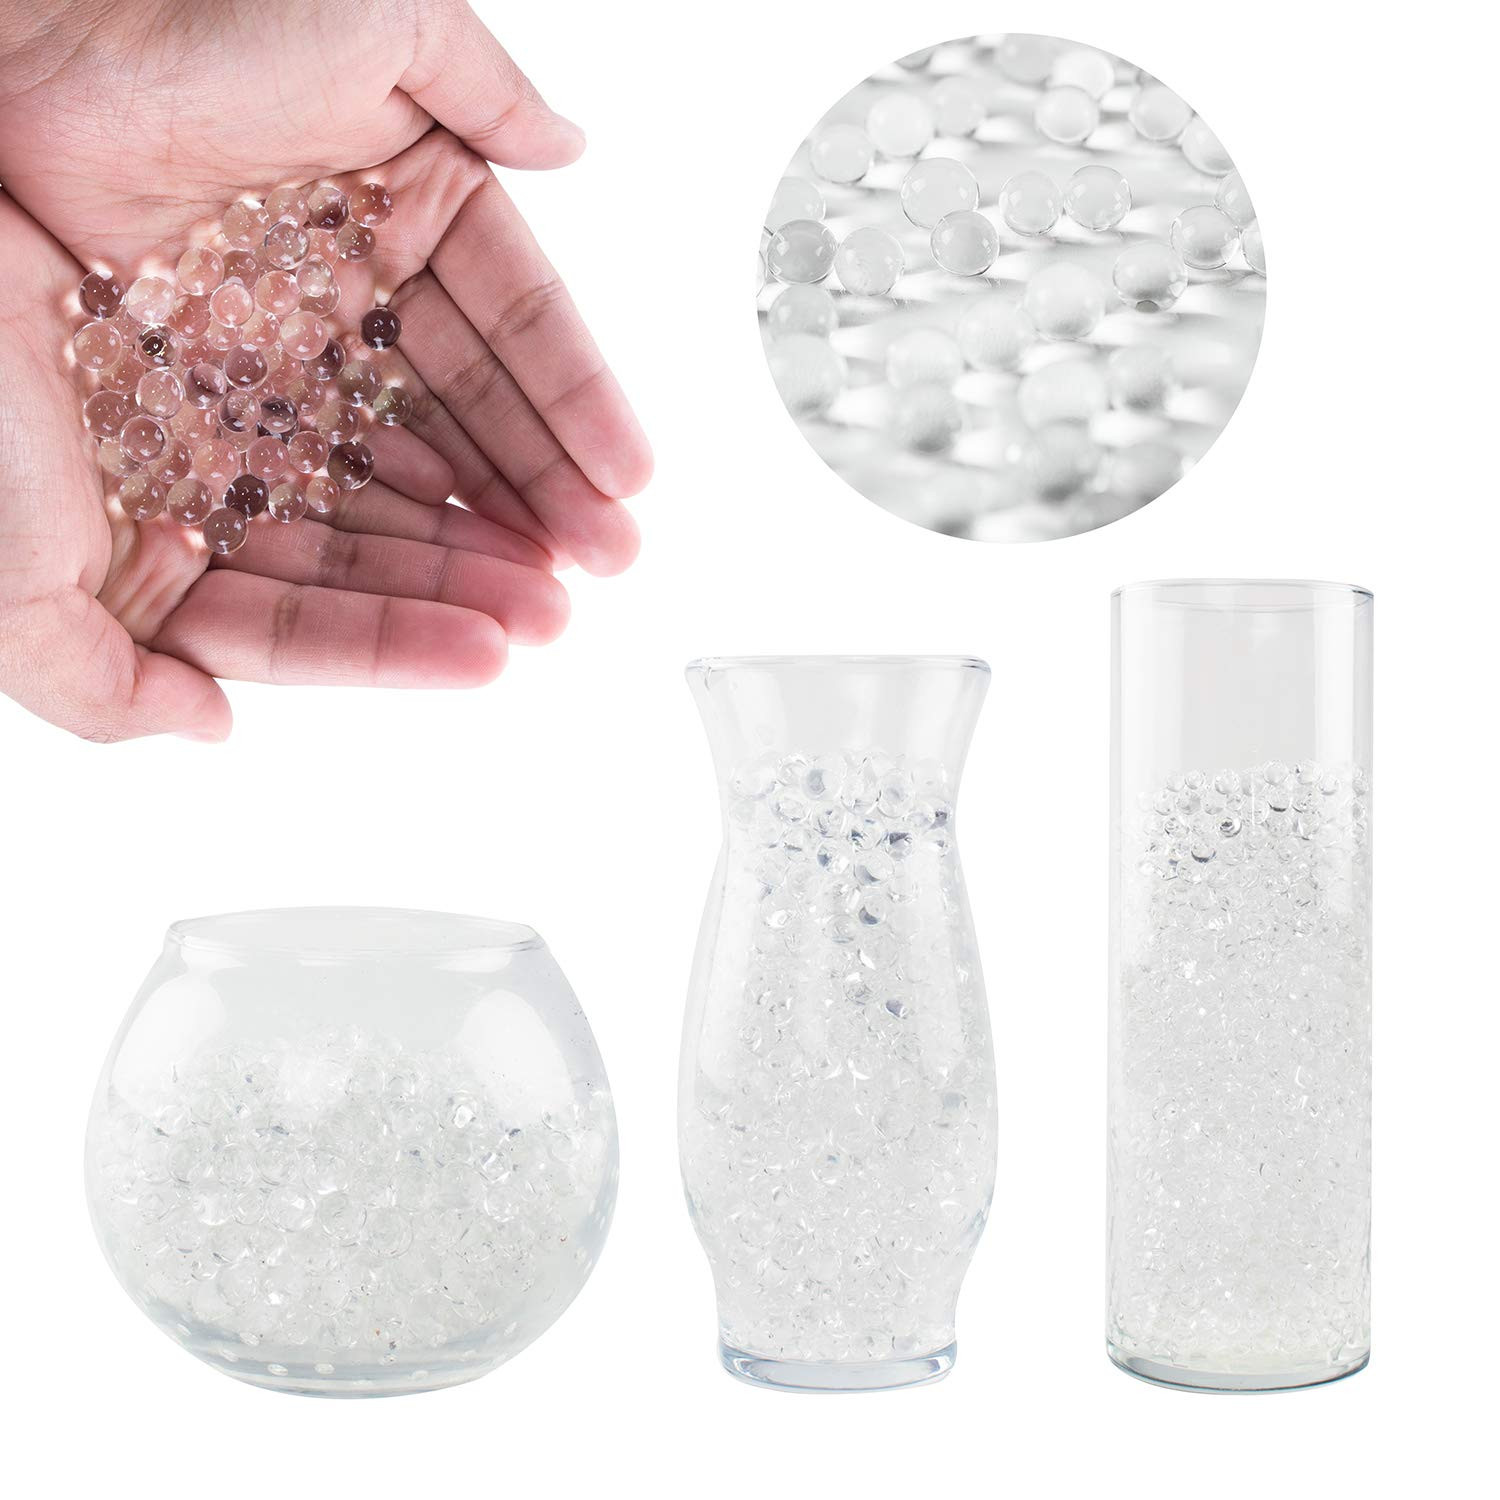 26 Unique Black and White Vase Fillers 2024 free download black and white vase fillers of best floating pearls for centerpieces amazon com with super z outlet 1 pound bag of clear water gel beads pearls for vase filler candles wedding centerpiece h